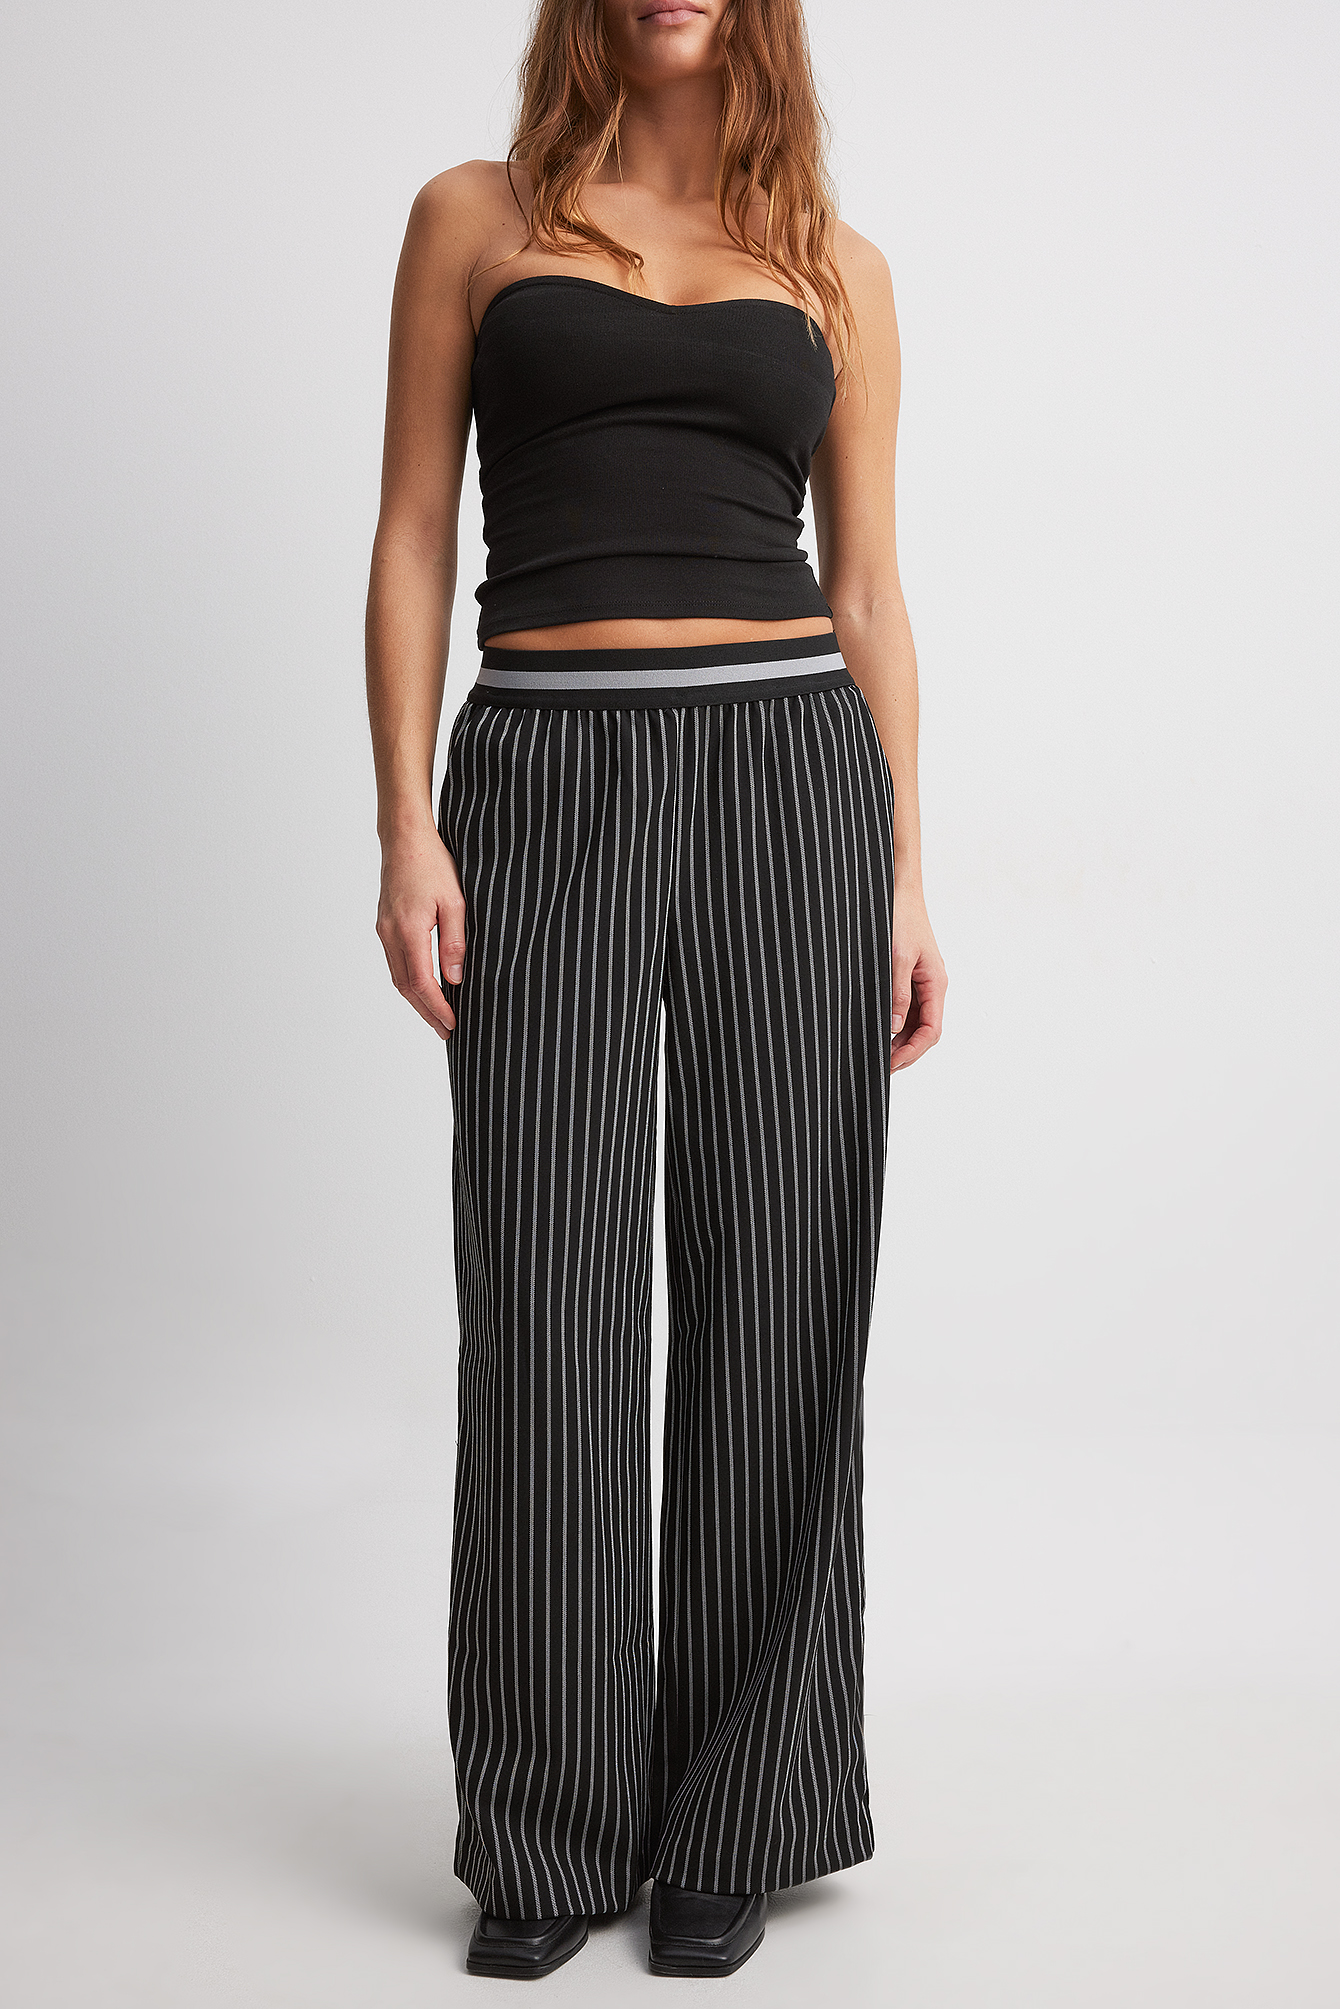 Printed Ladies Black White Striped Pant, Waist Size: 30.0 at Rs 140/piece  in Ludhiana